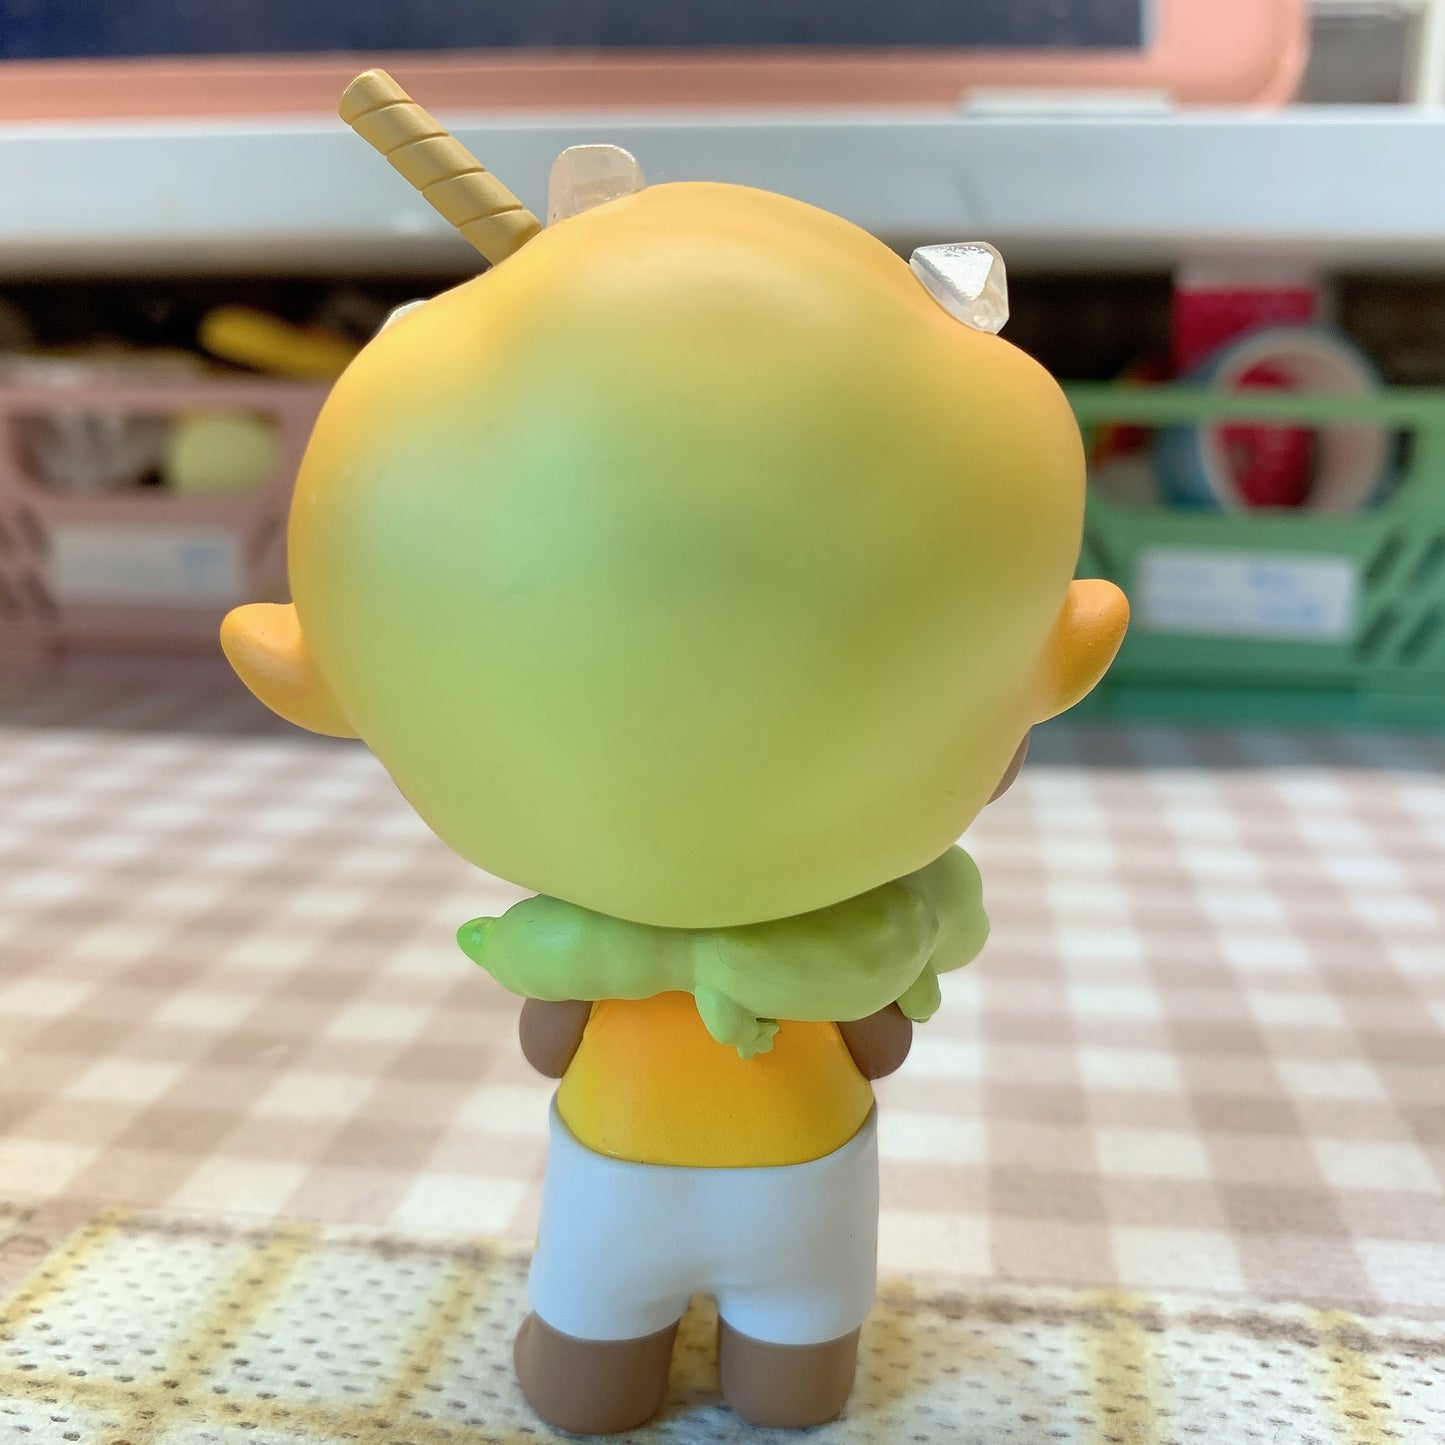 【PRELOVED and SALE 】POPMART Dimoo blind box toy Pets Vacation Summer Lemon Tea